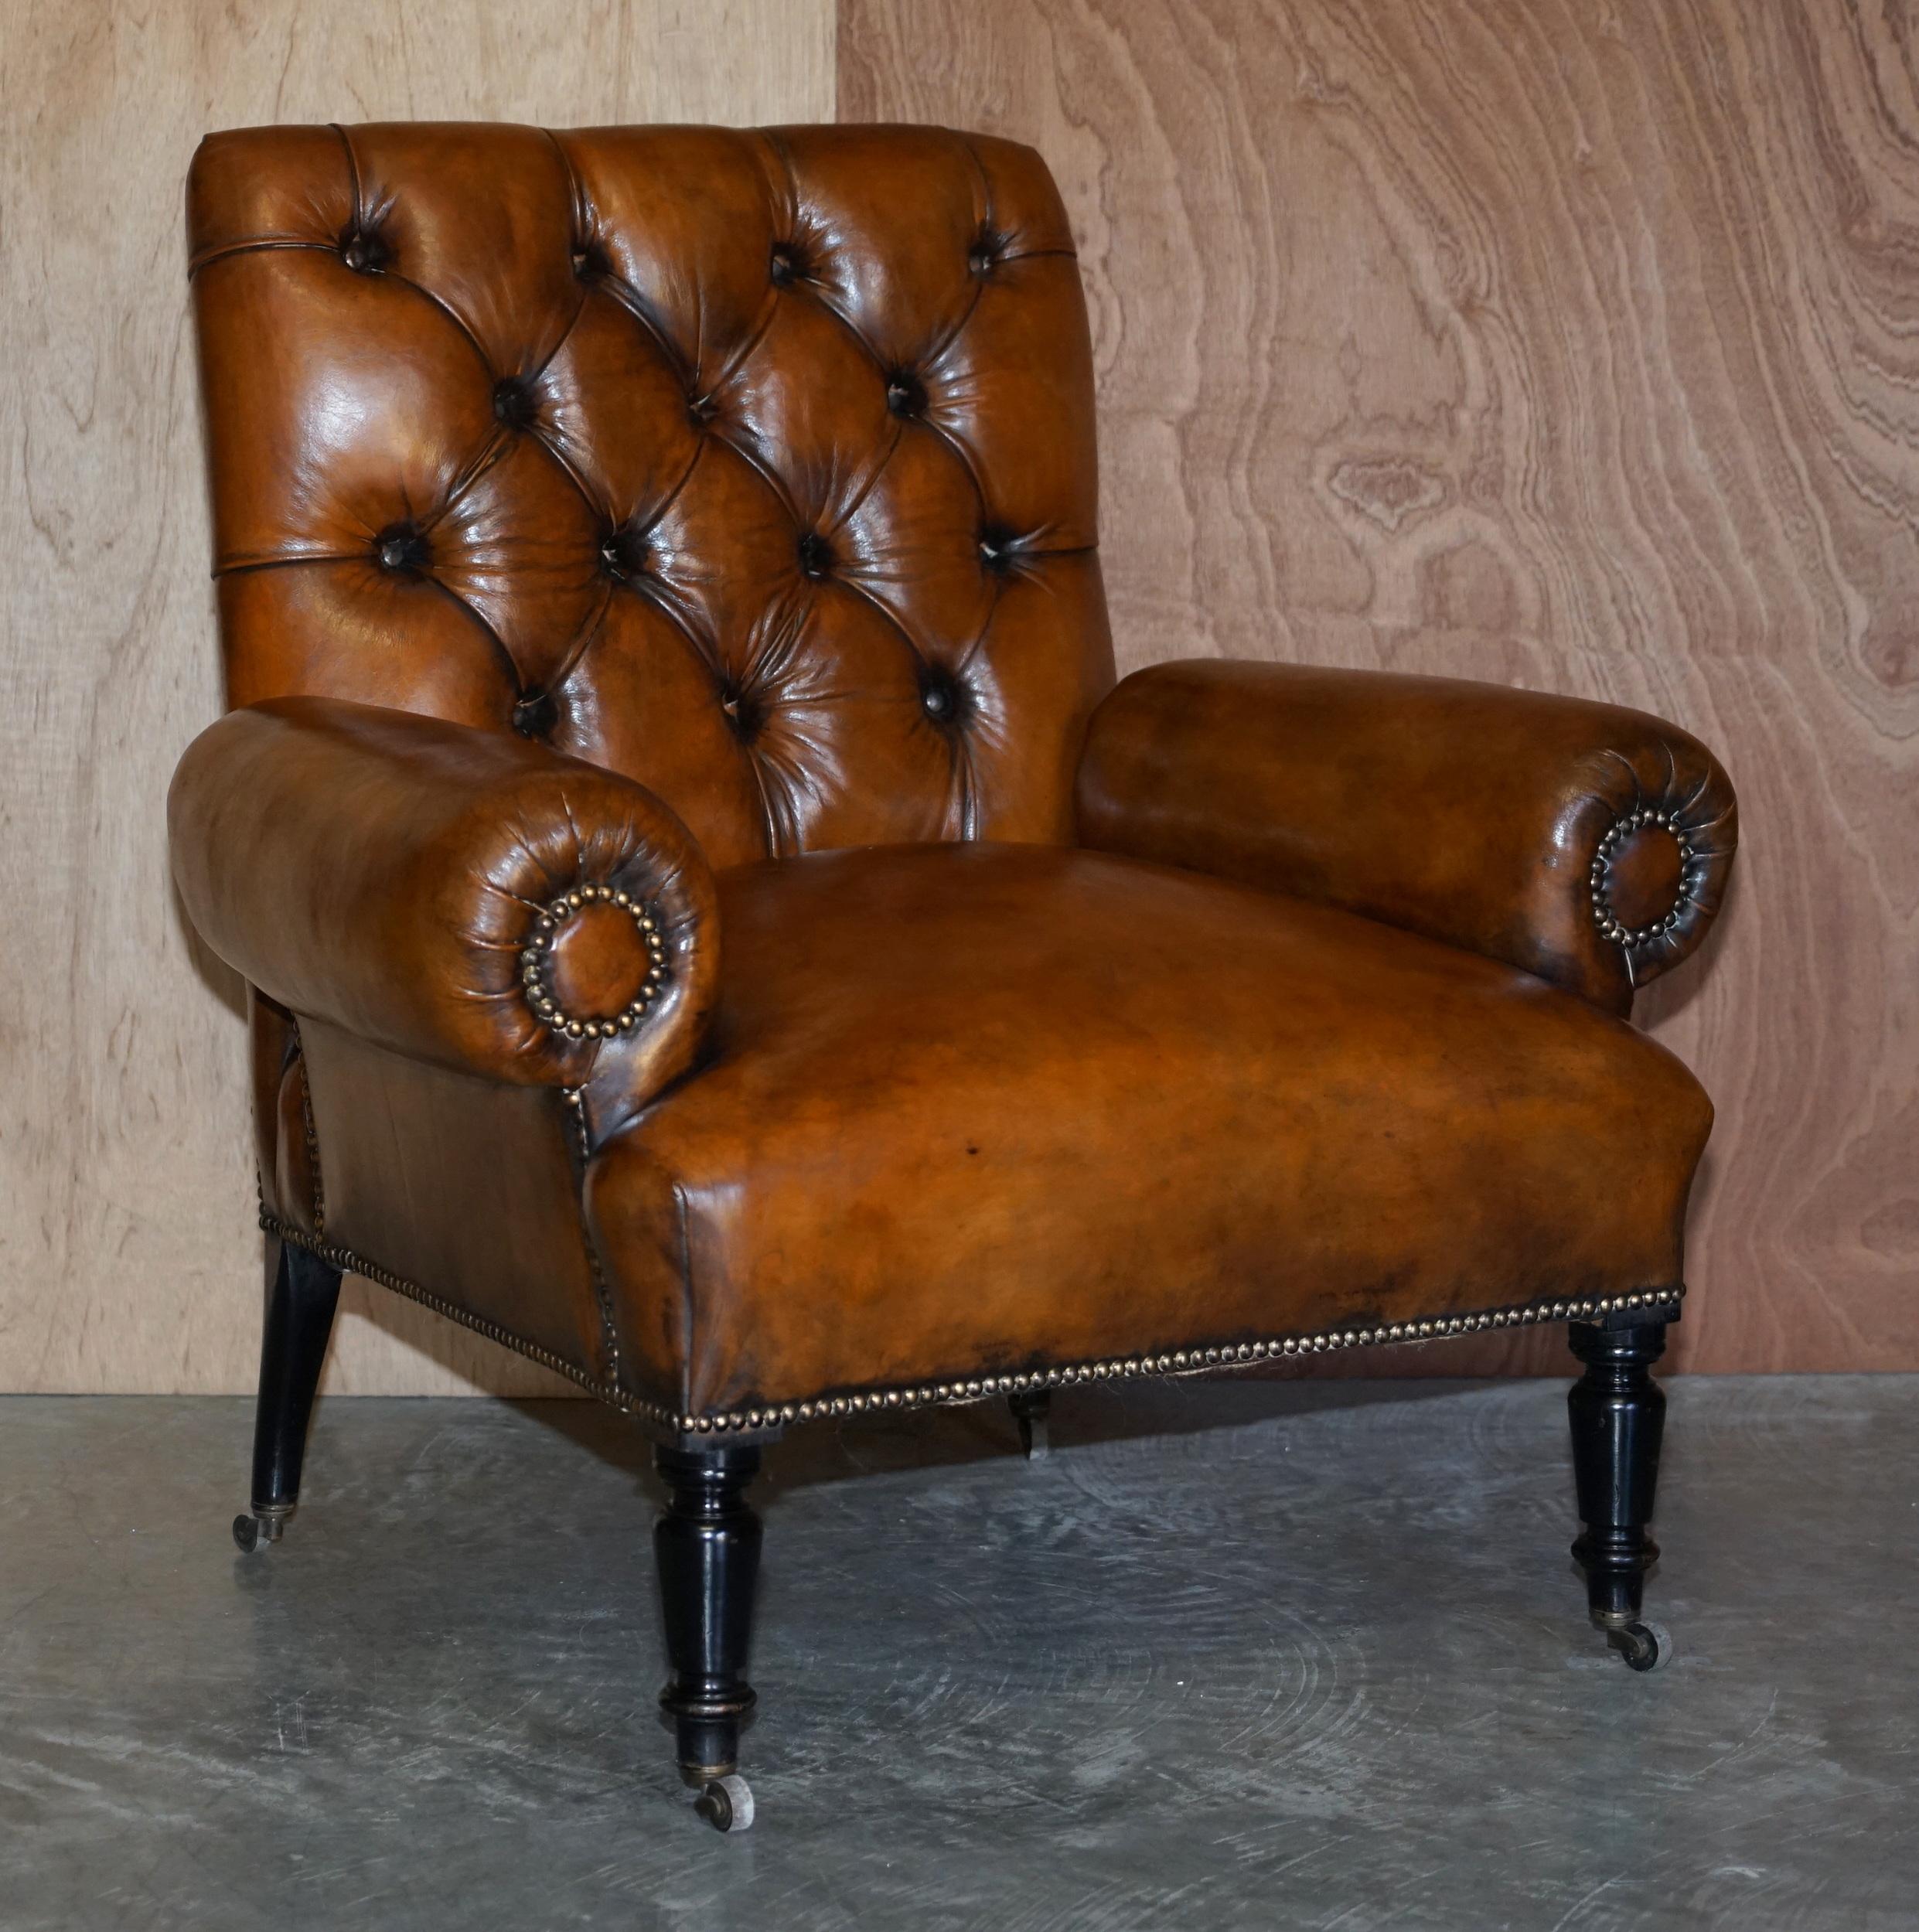 We are delighted to offer this lovely pair of circa 1810-1820 Antique Regency fully restored Chesterfield brown leather hand dyed armchairs with Bolster arms

A fantastic looking and well made pair, the chairs have been fully restored to include